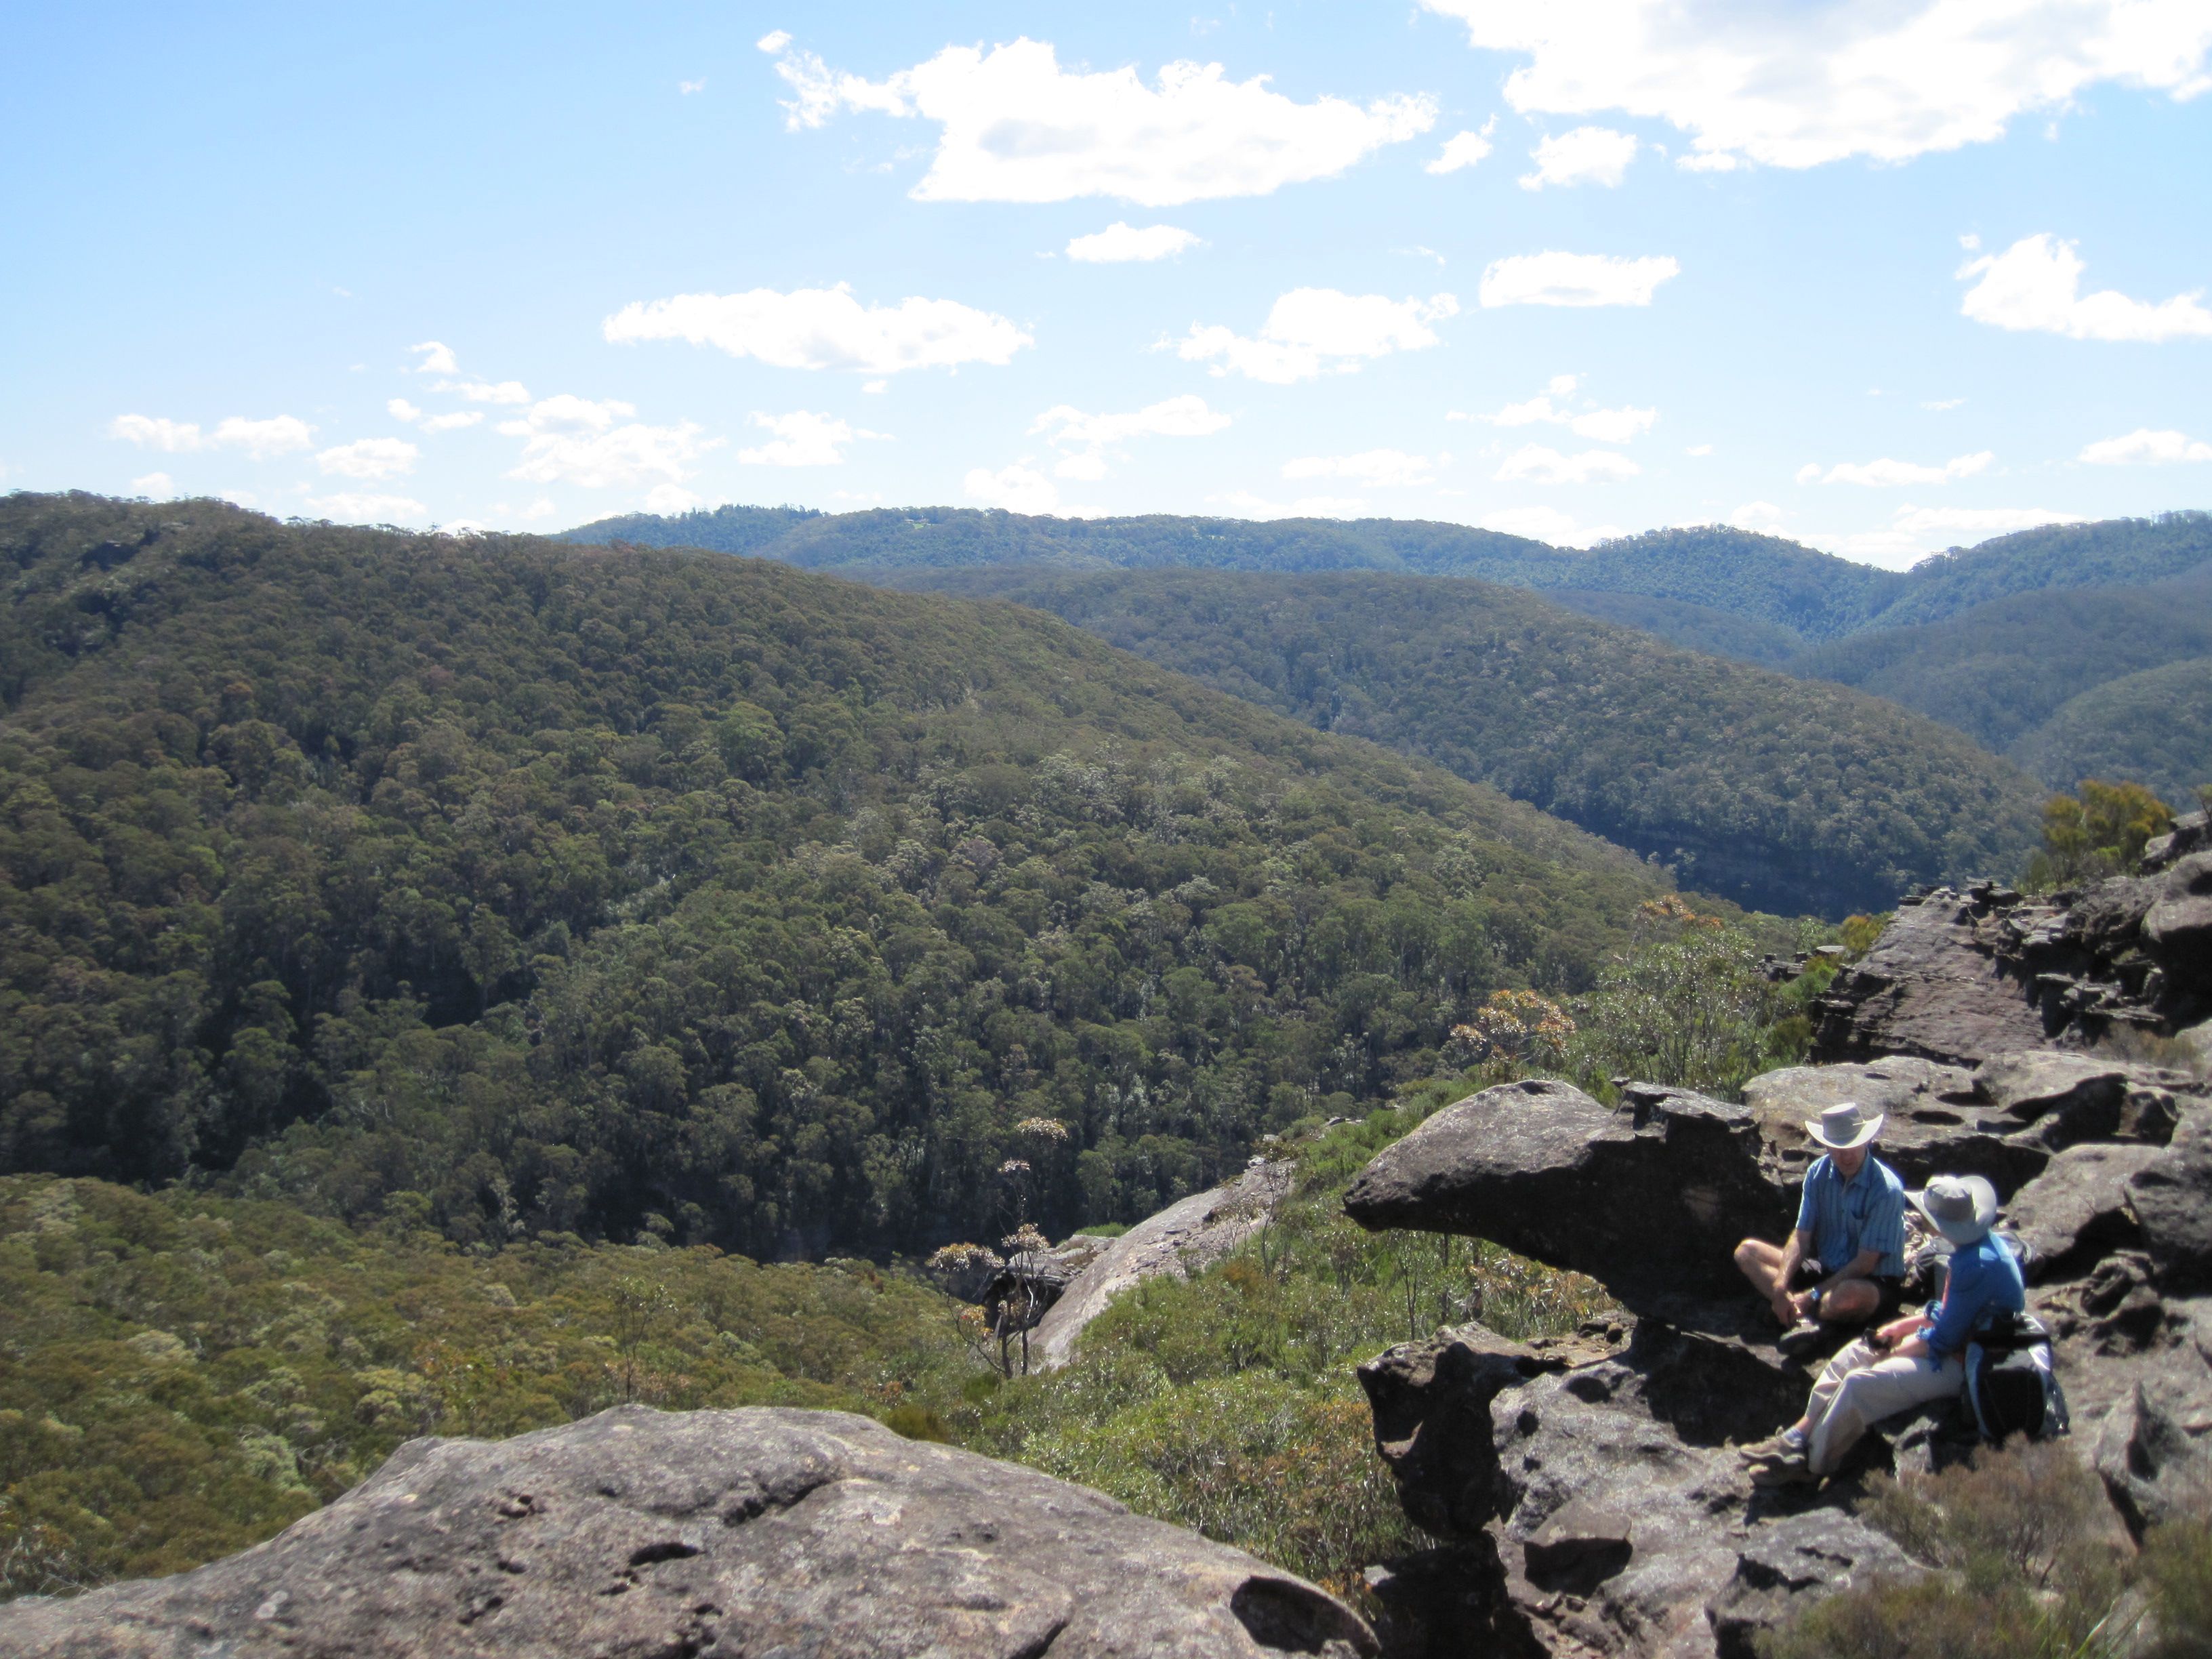 Getting off the beaten track in the beautiful Blue Mountains